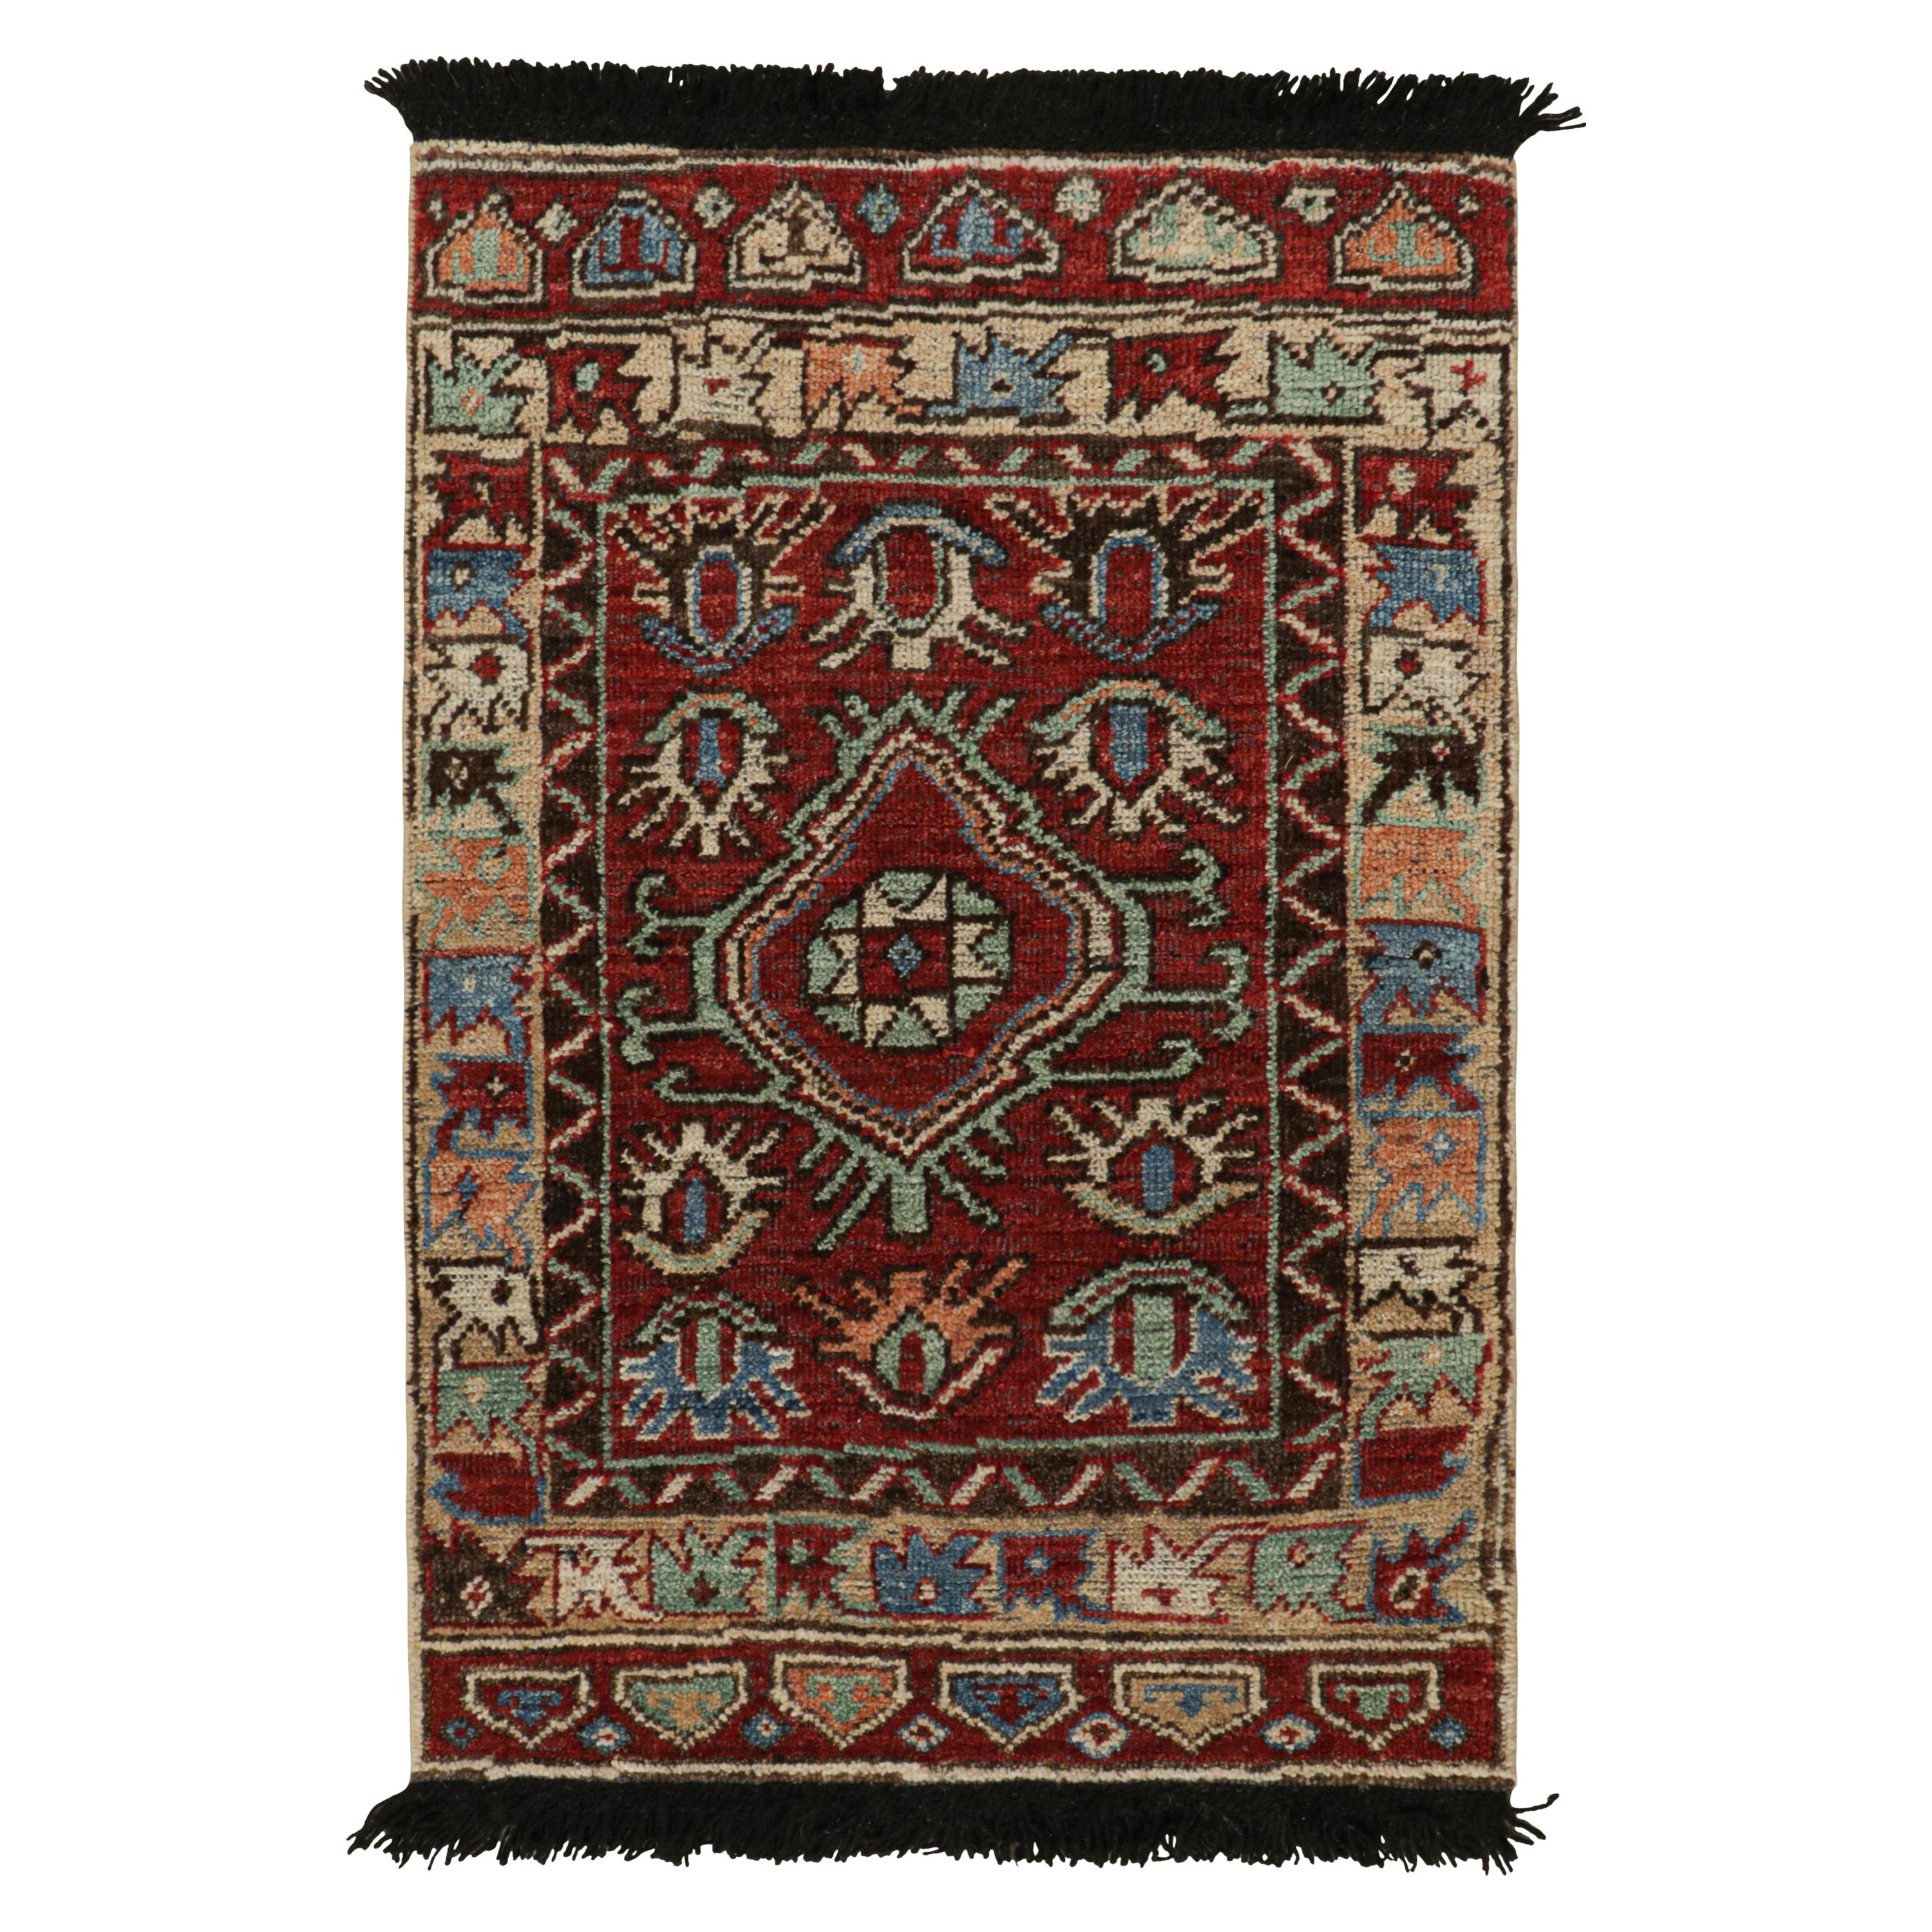 Rug & Kilim’s Antique Tribal Style Rug in Red, Blue, Green & Black Patterns For Sale